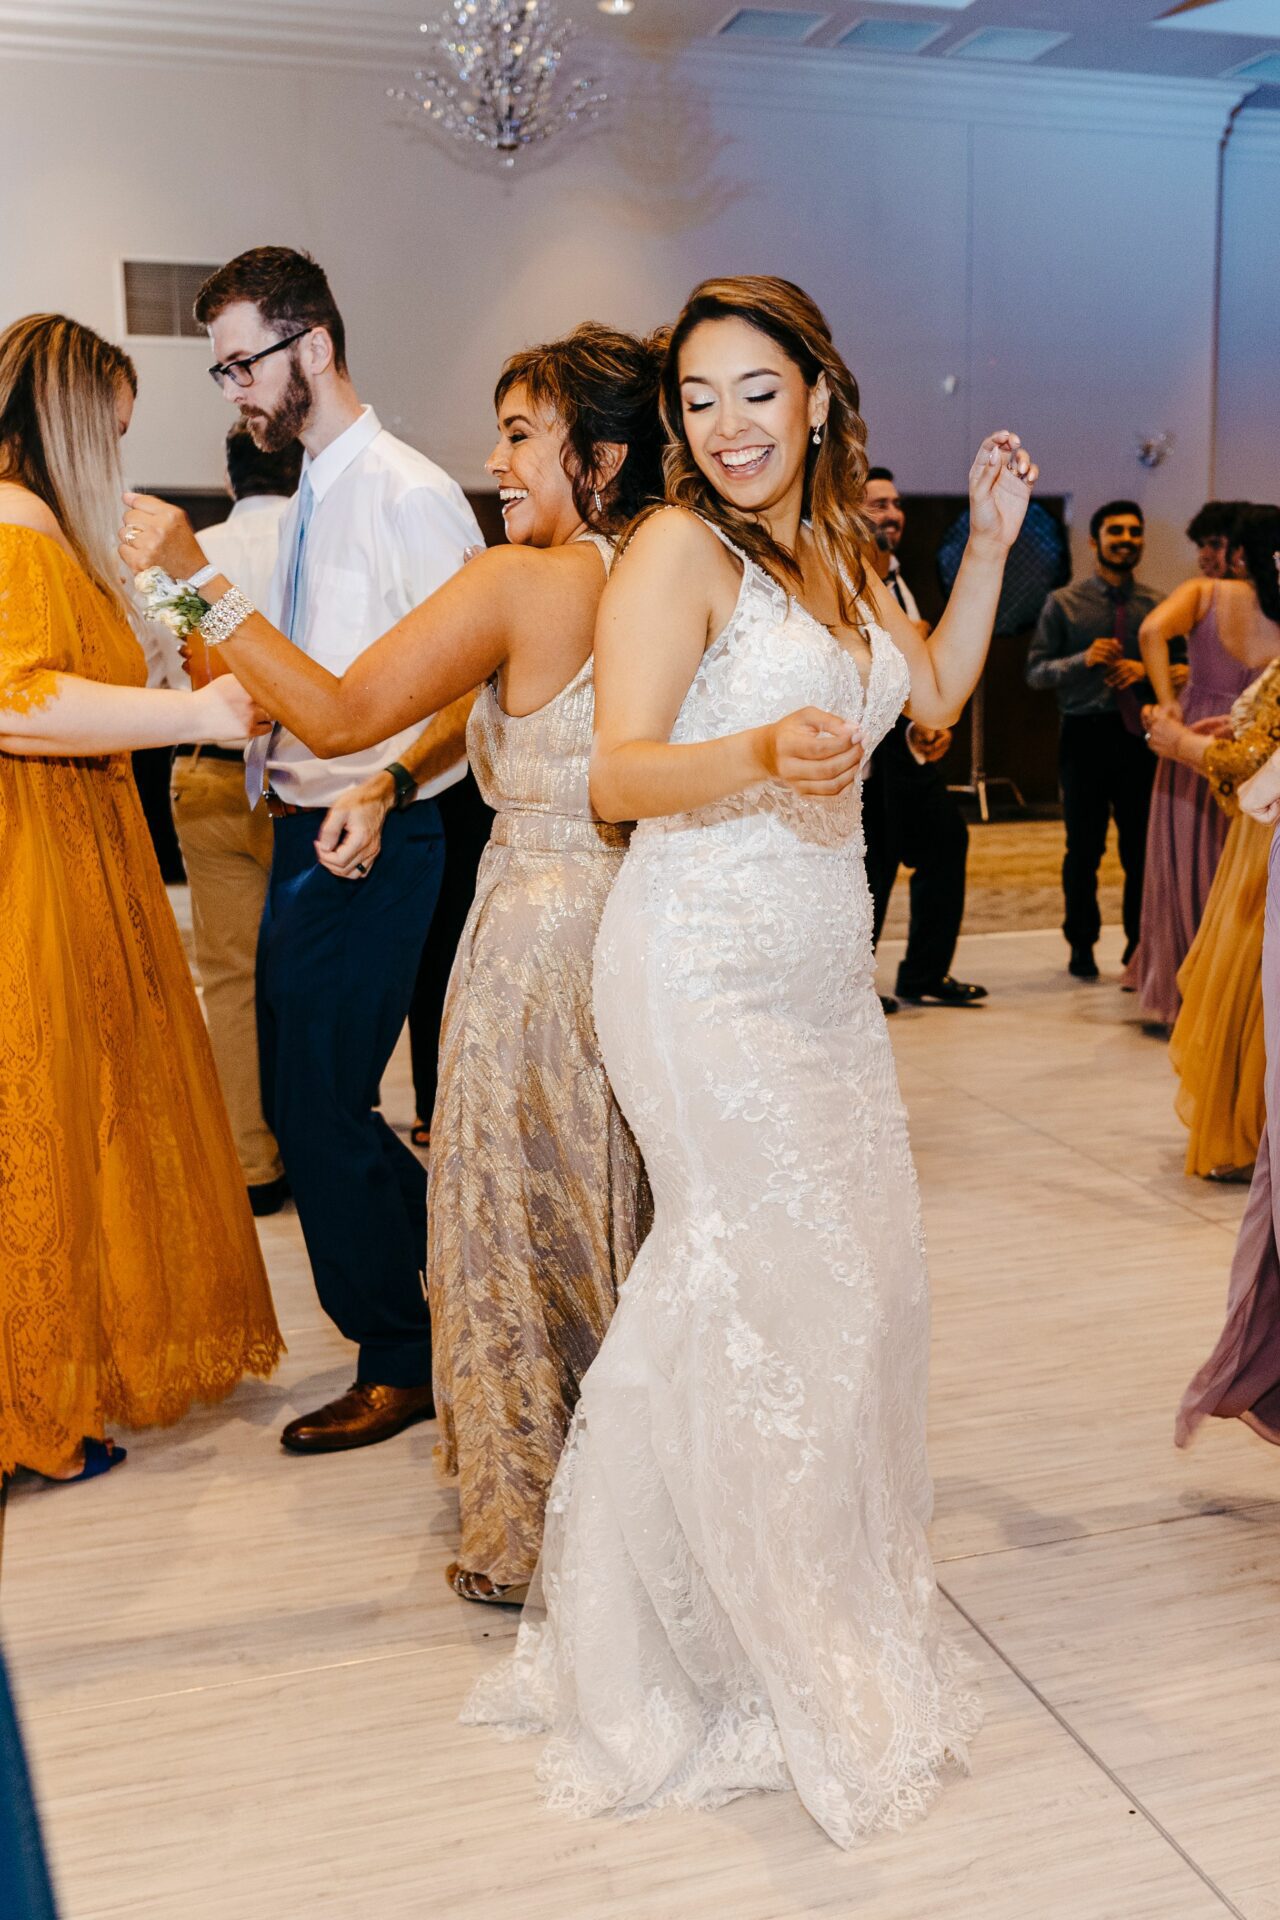 Bride dancing with her friends during her wedding at Tuscawilla Country Club